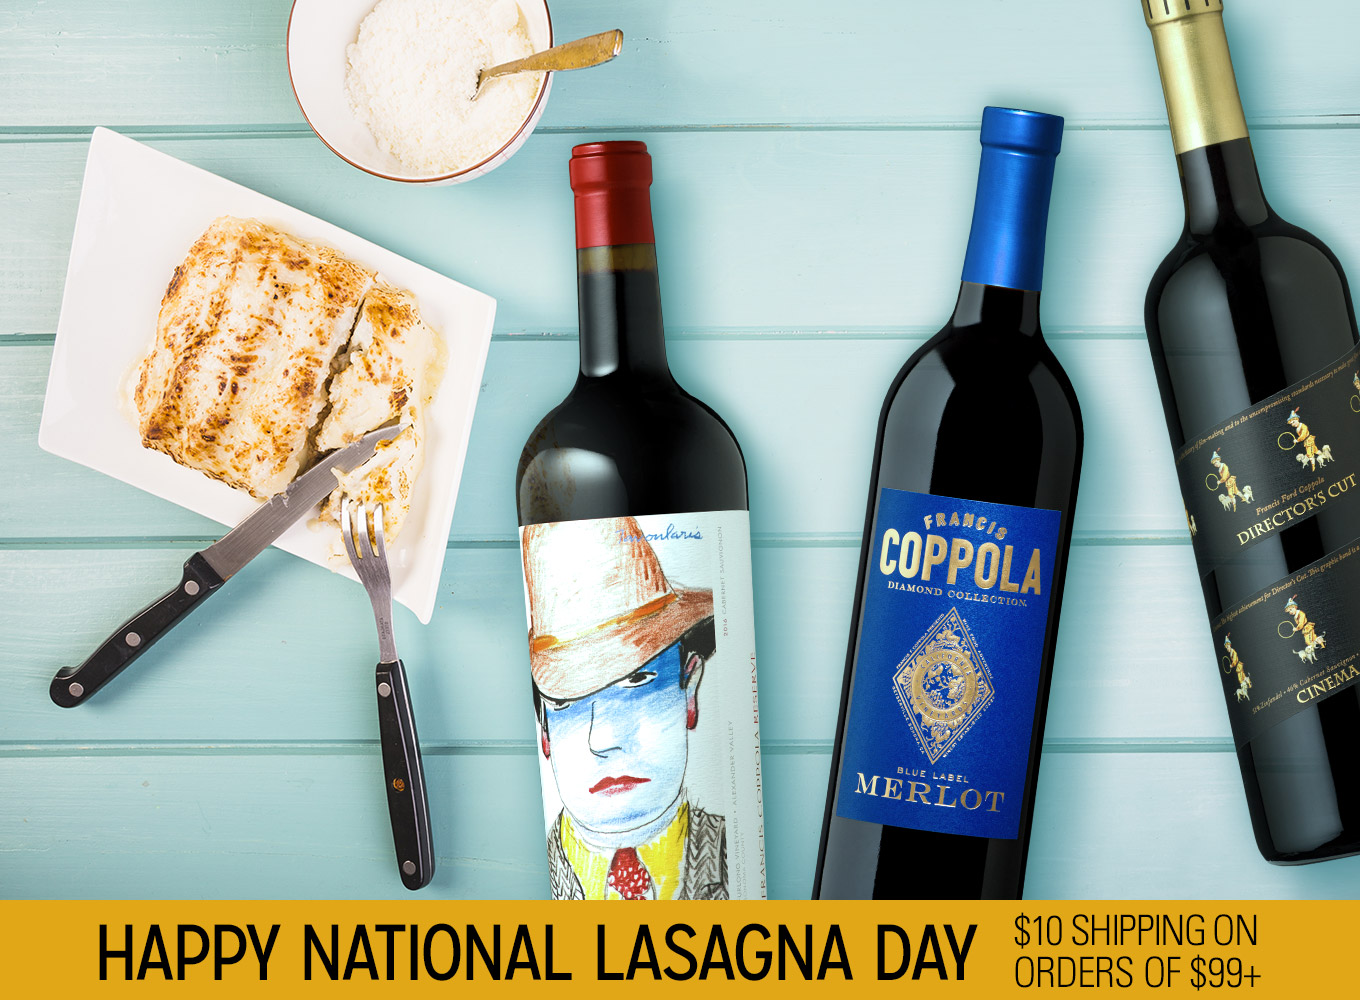 Happy National Lasagna Day! $10 shipping on orders of $99 or more.